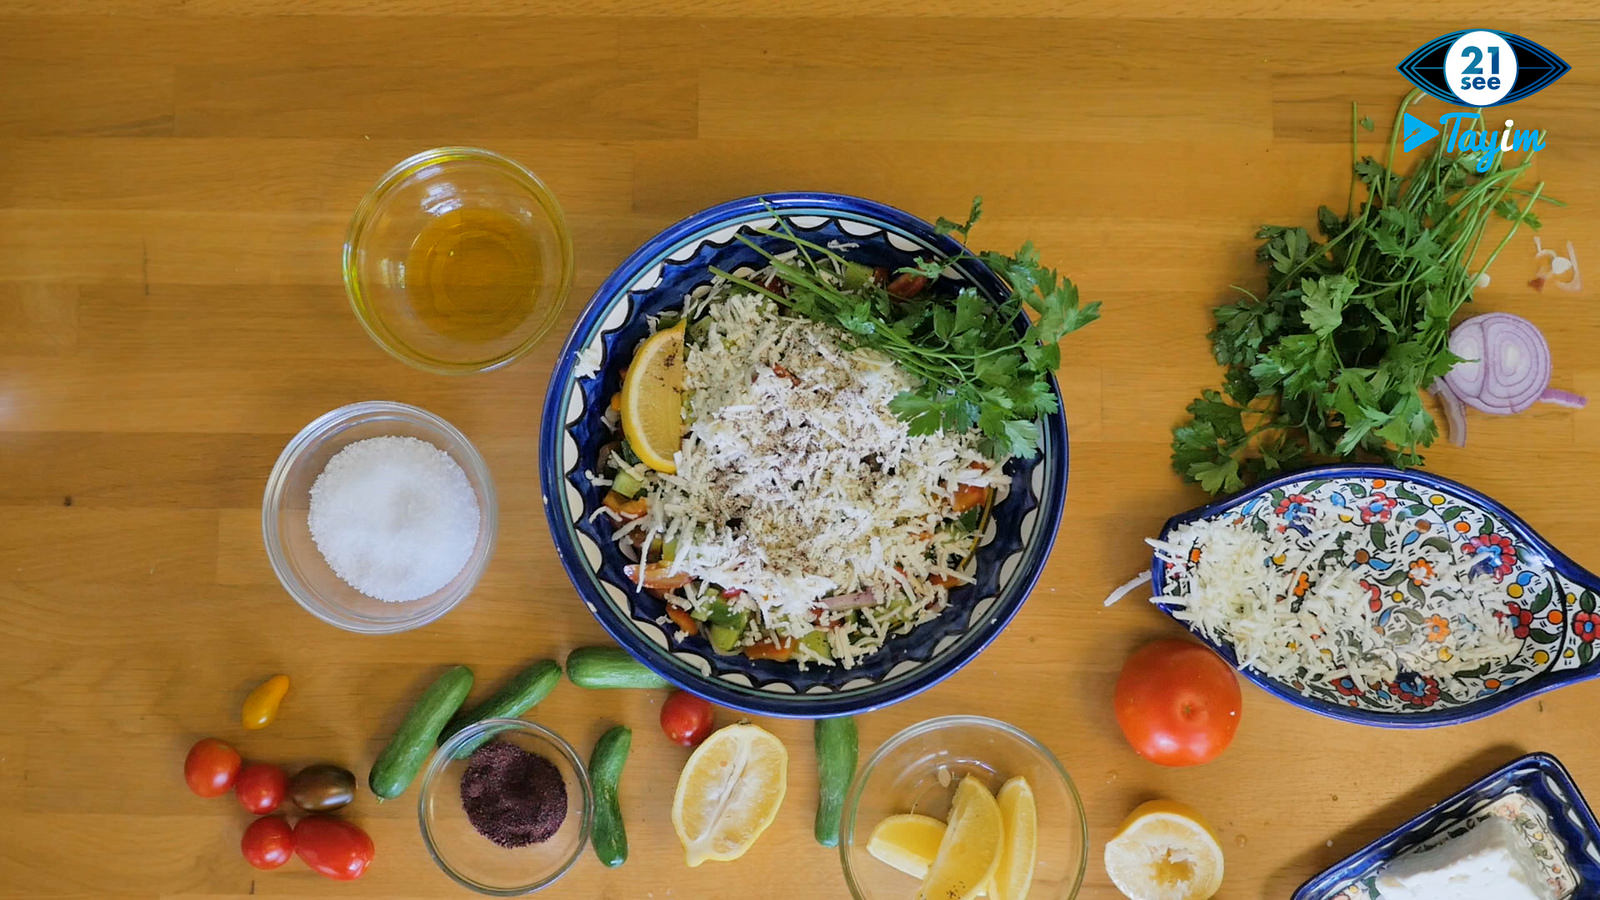 Fresh vegetables and olive oil form the basis of this tasty salad. Photo: screenshot